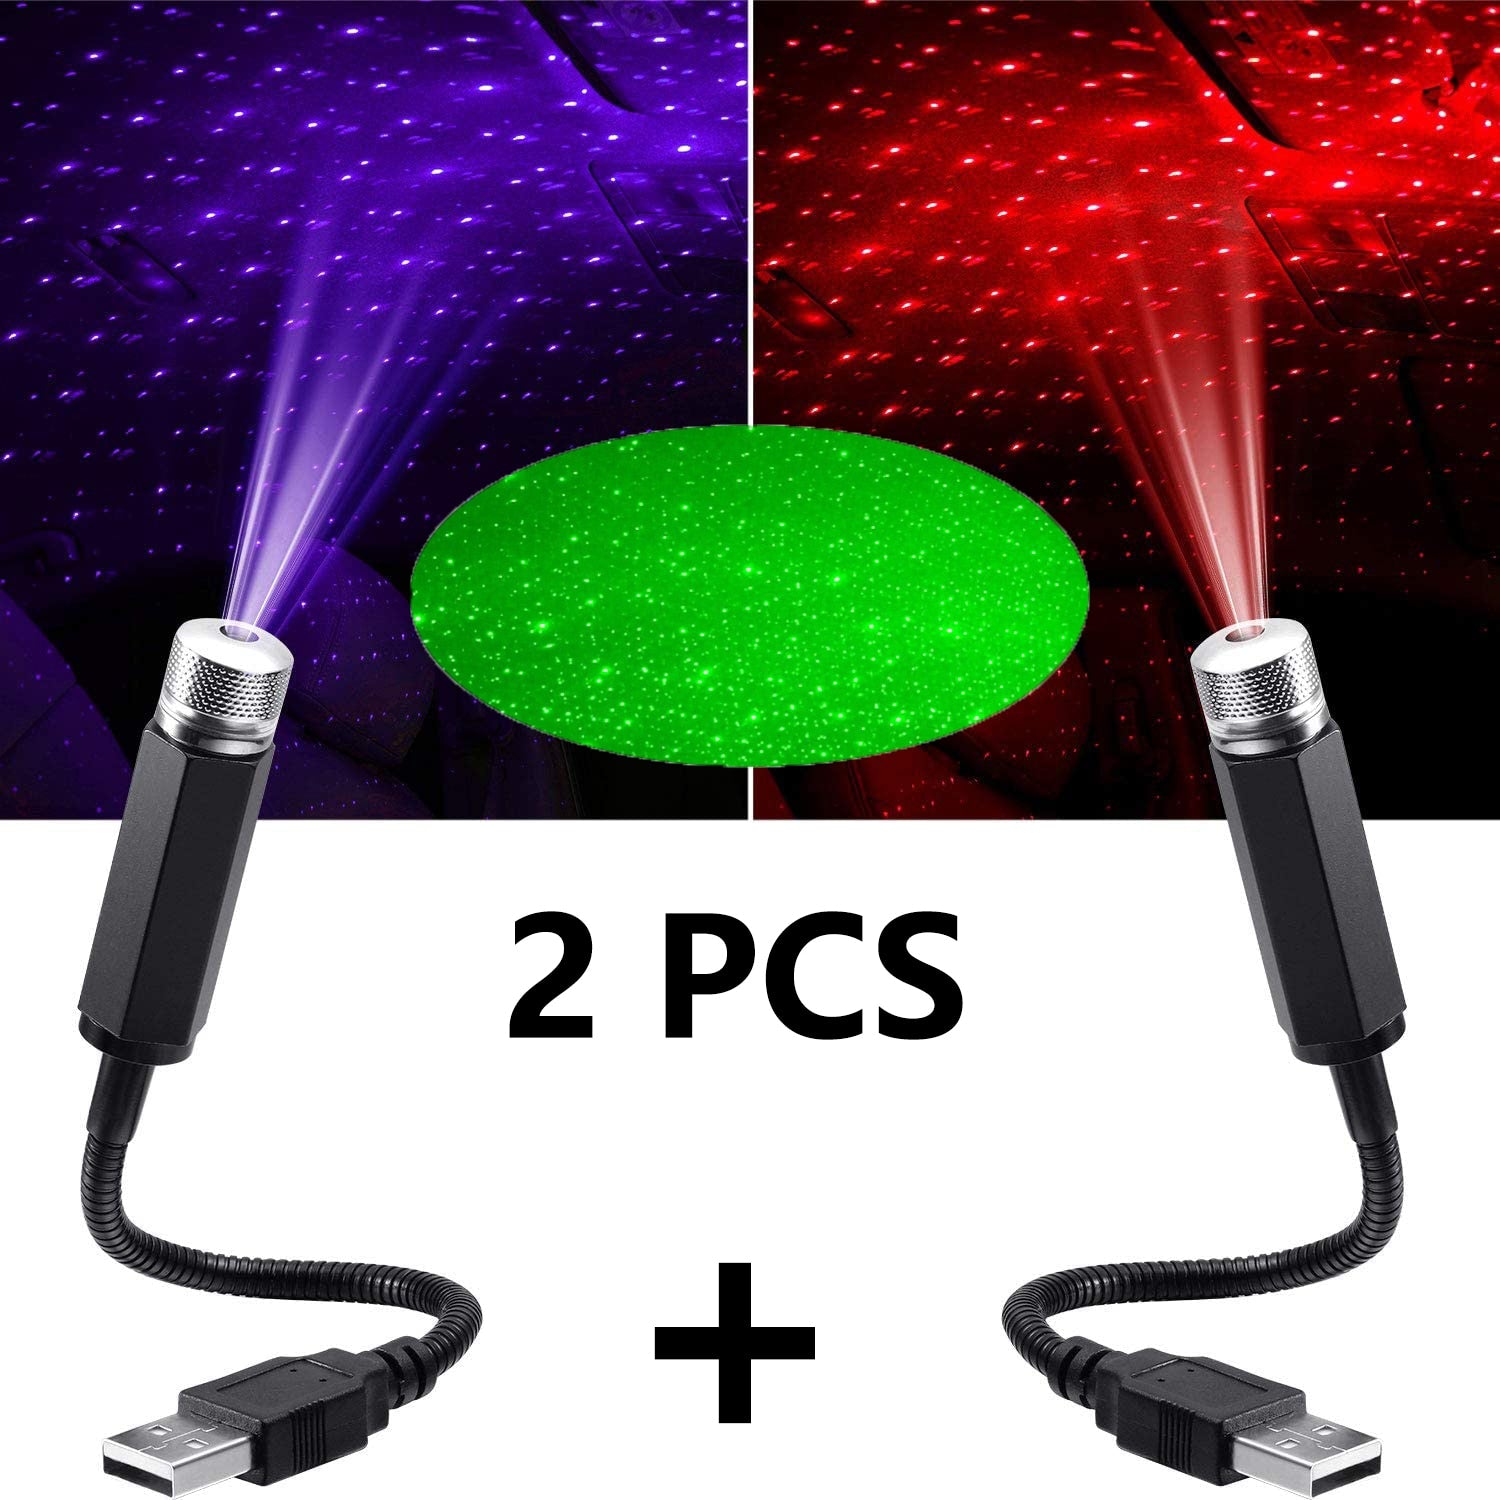 2X Romantic LED Starry Sky Night Light 5V USB Powered Galaxy Star Projector Lamp for Car Roof Room Ceiling Decor Plug and Play